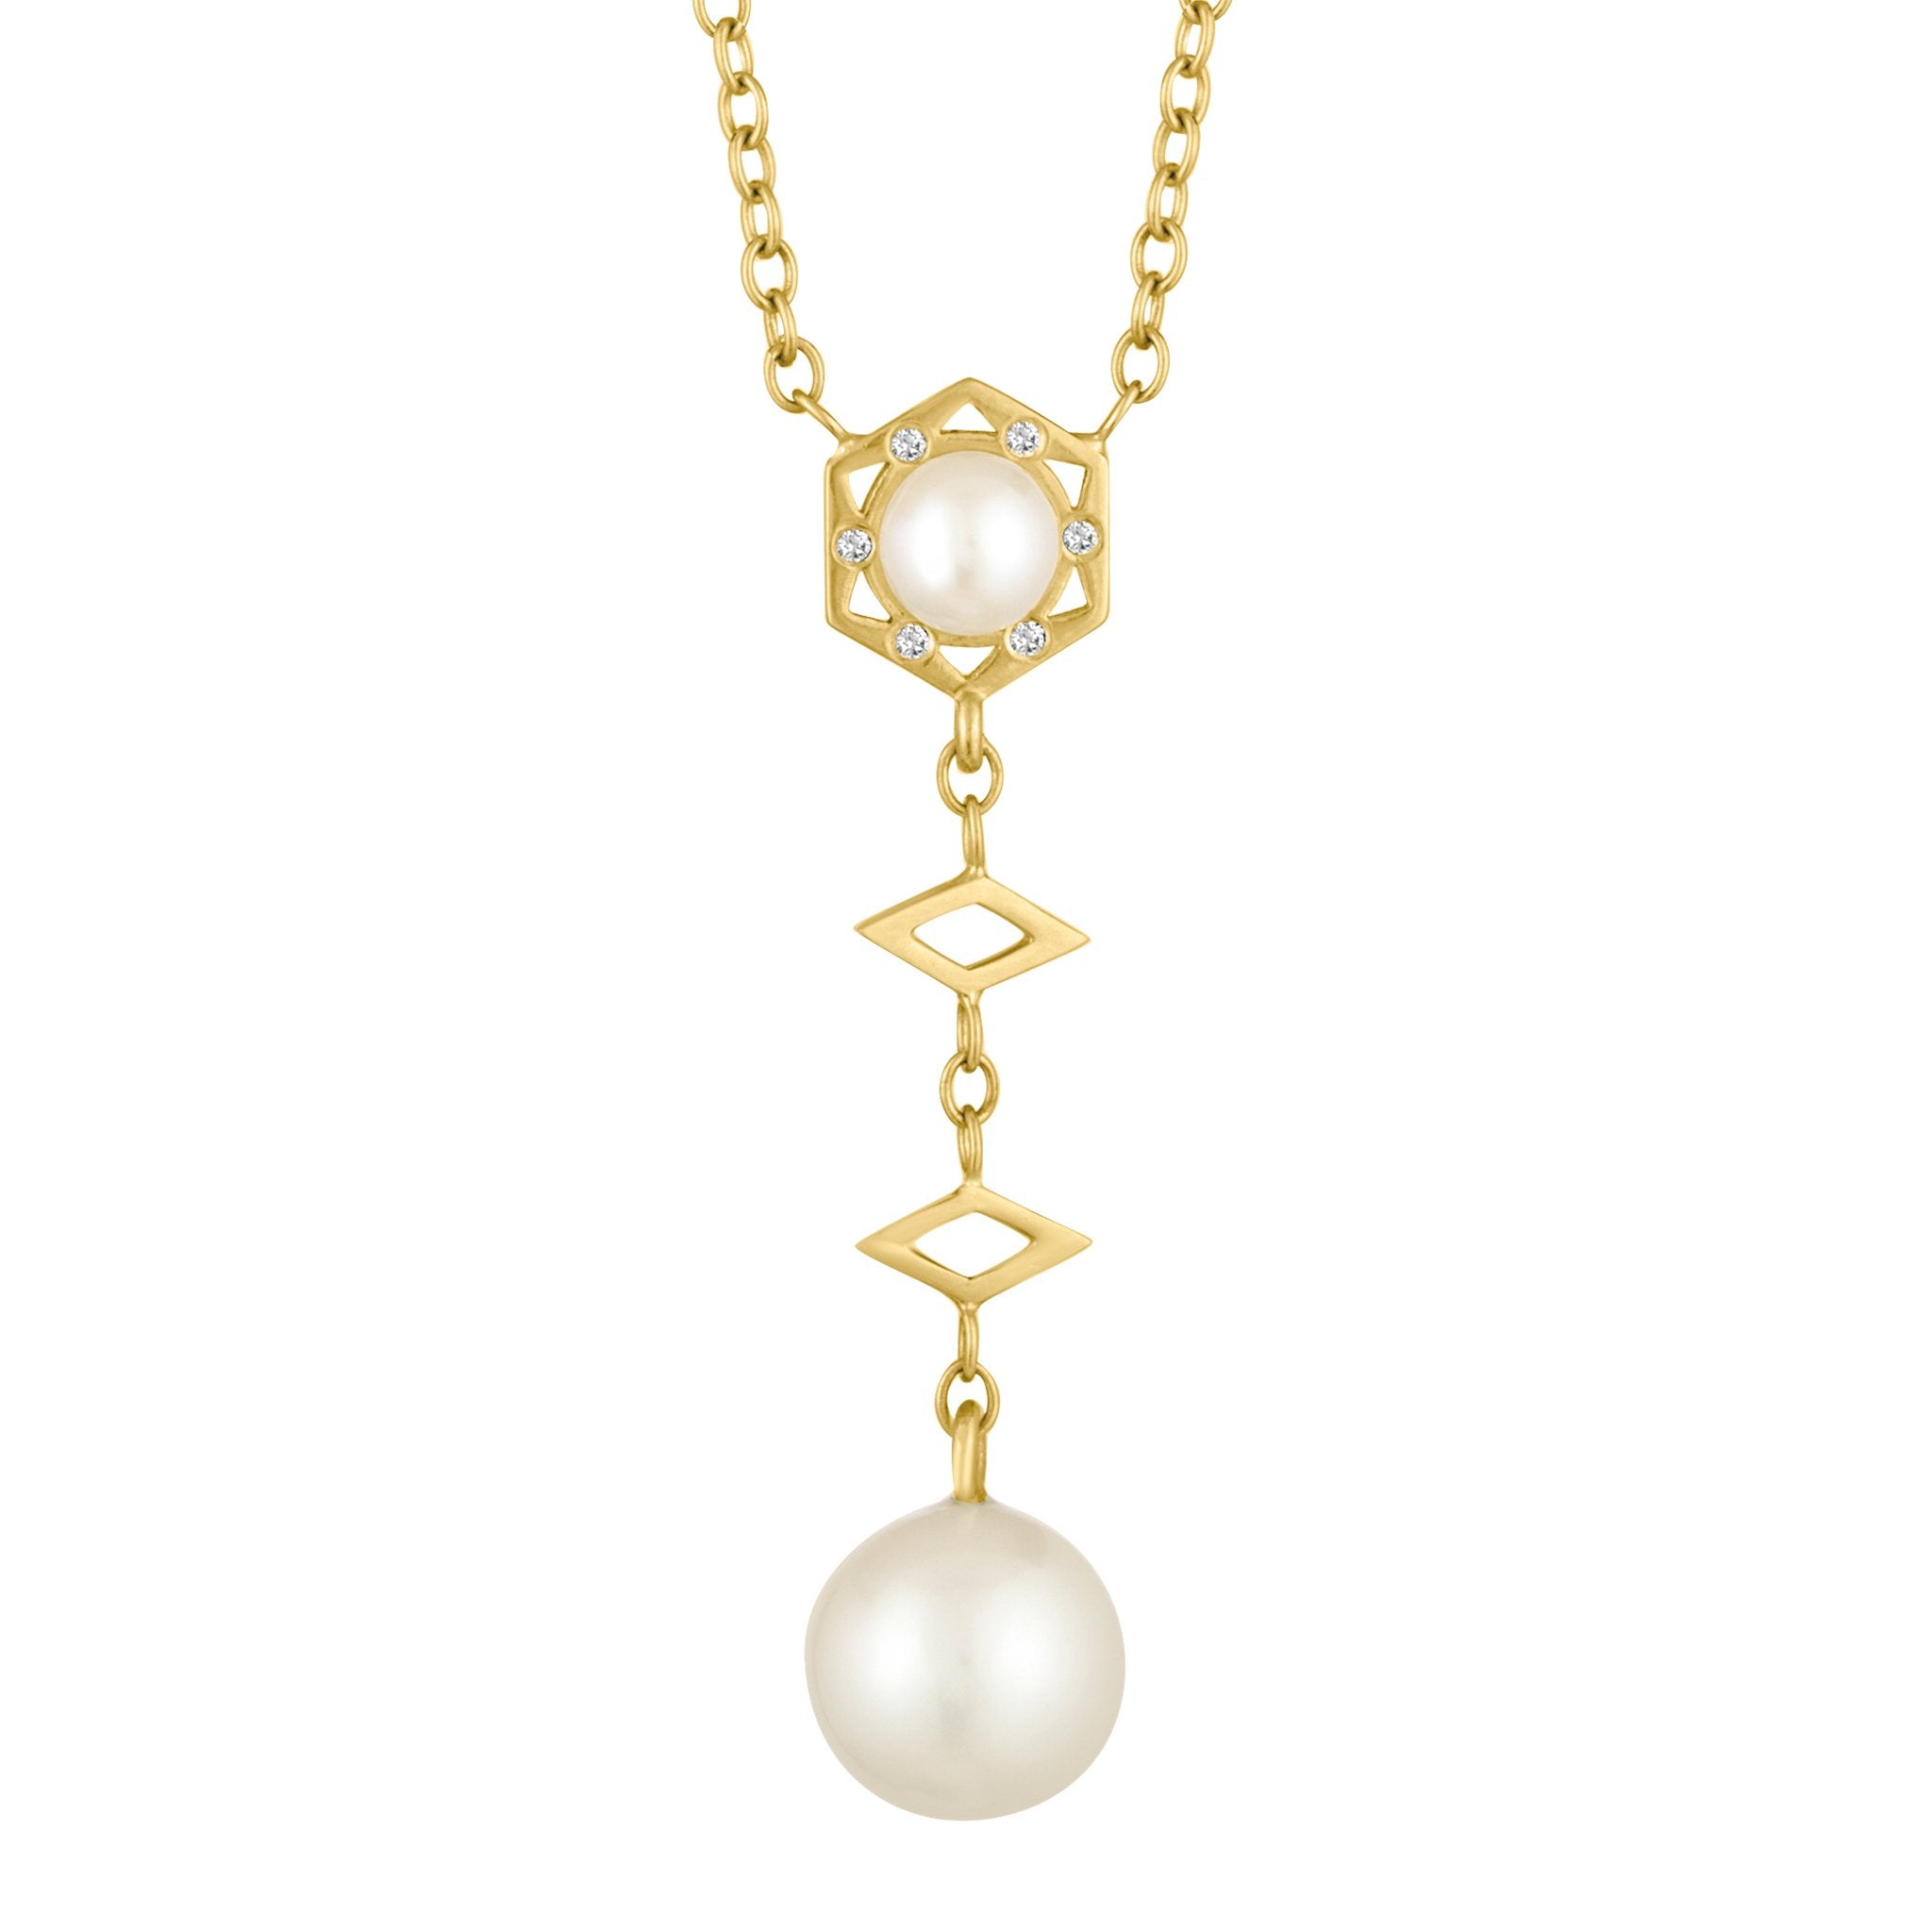 Cosmo Pearl Lariat Short Necklace: 18k Gold, Diamonds, Pearl Drop